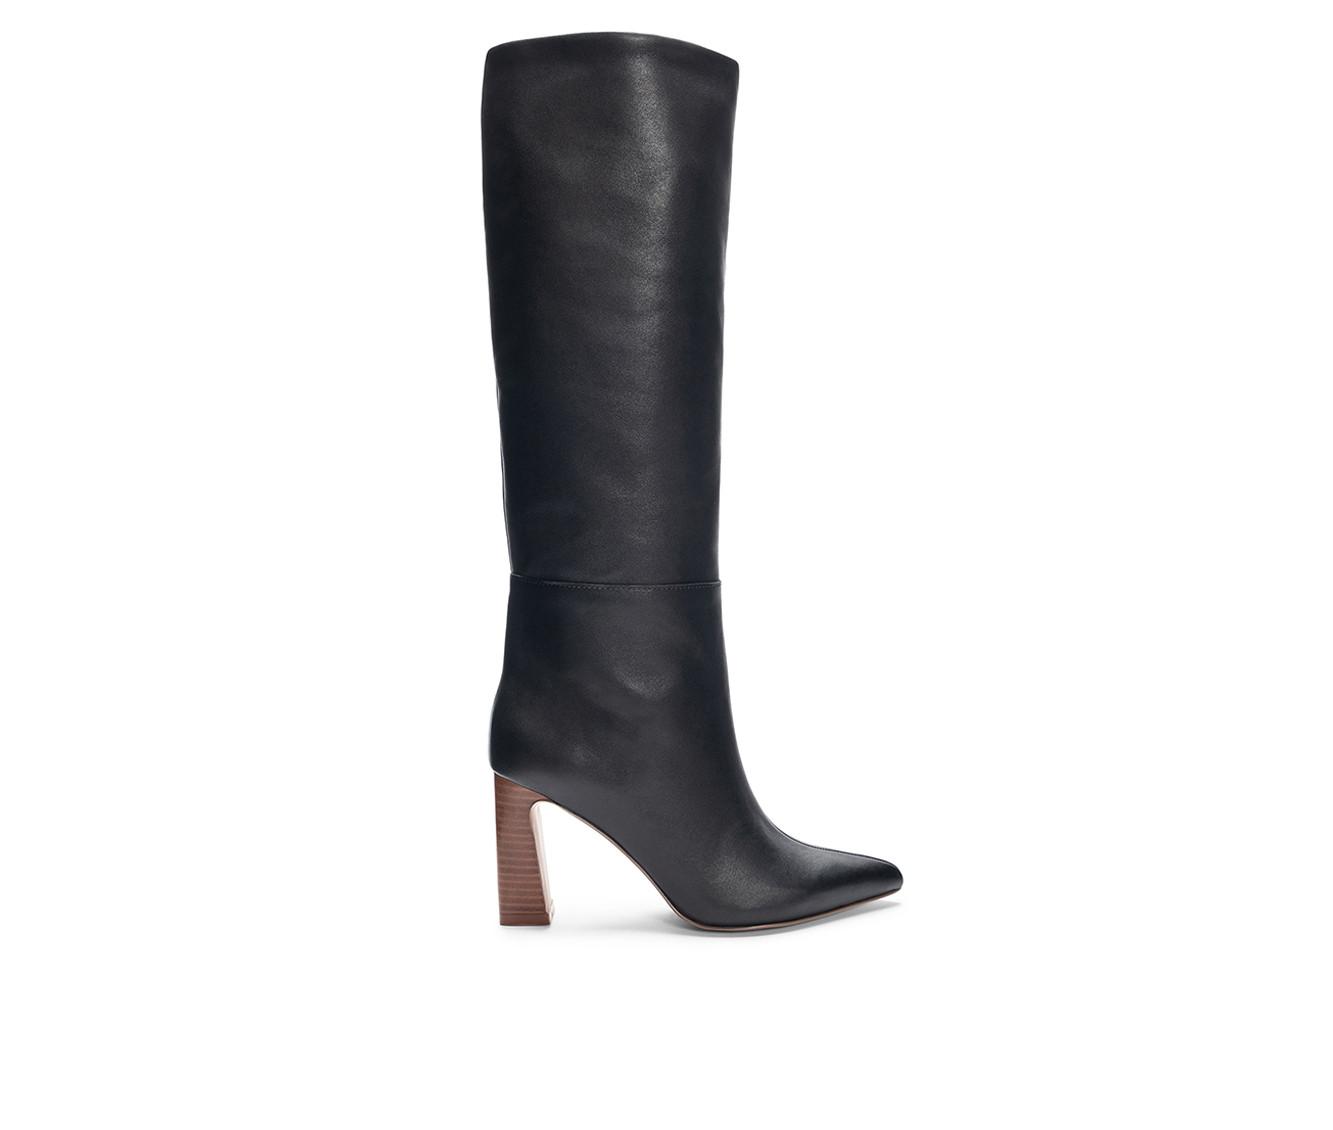 Women's Chinese Laundry Frankie Knee High Heeled Boots